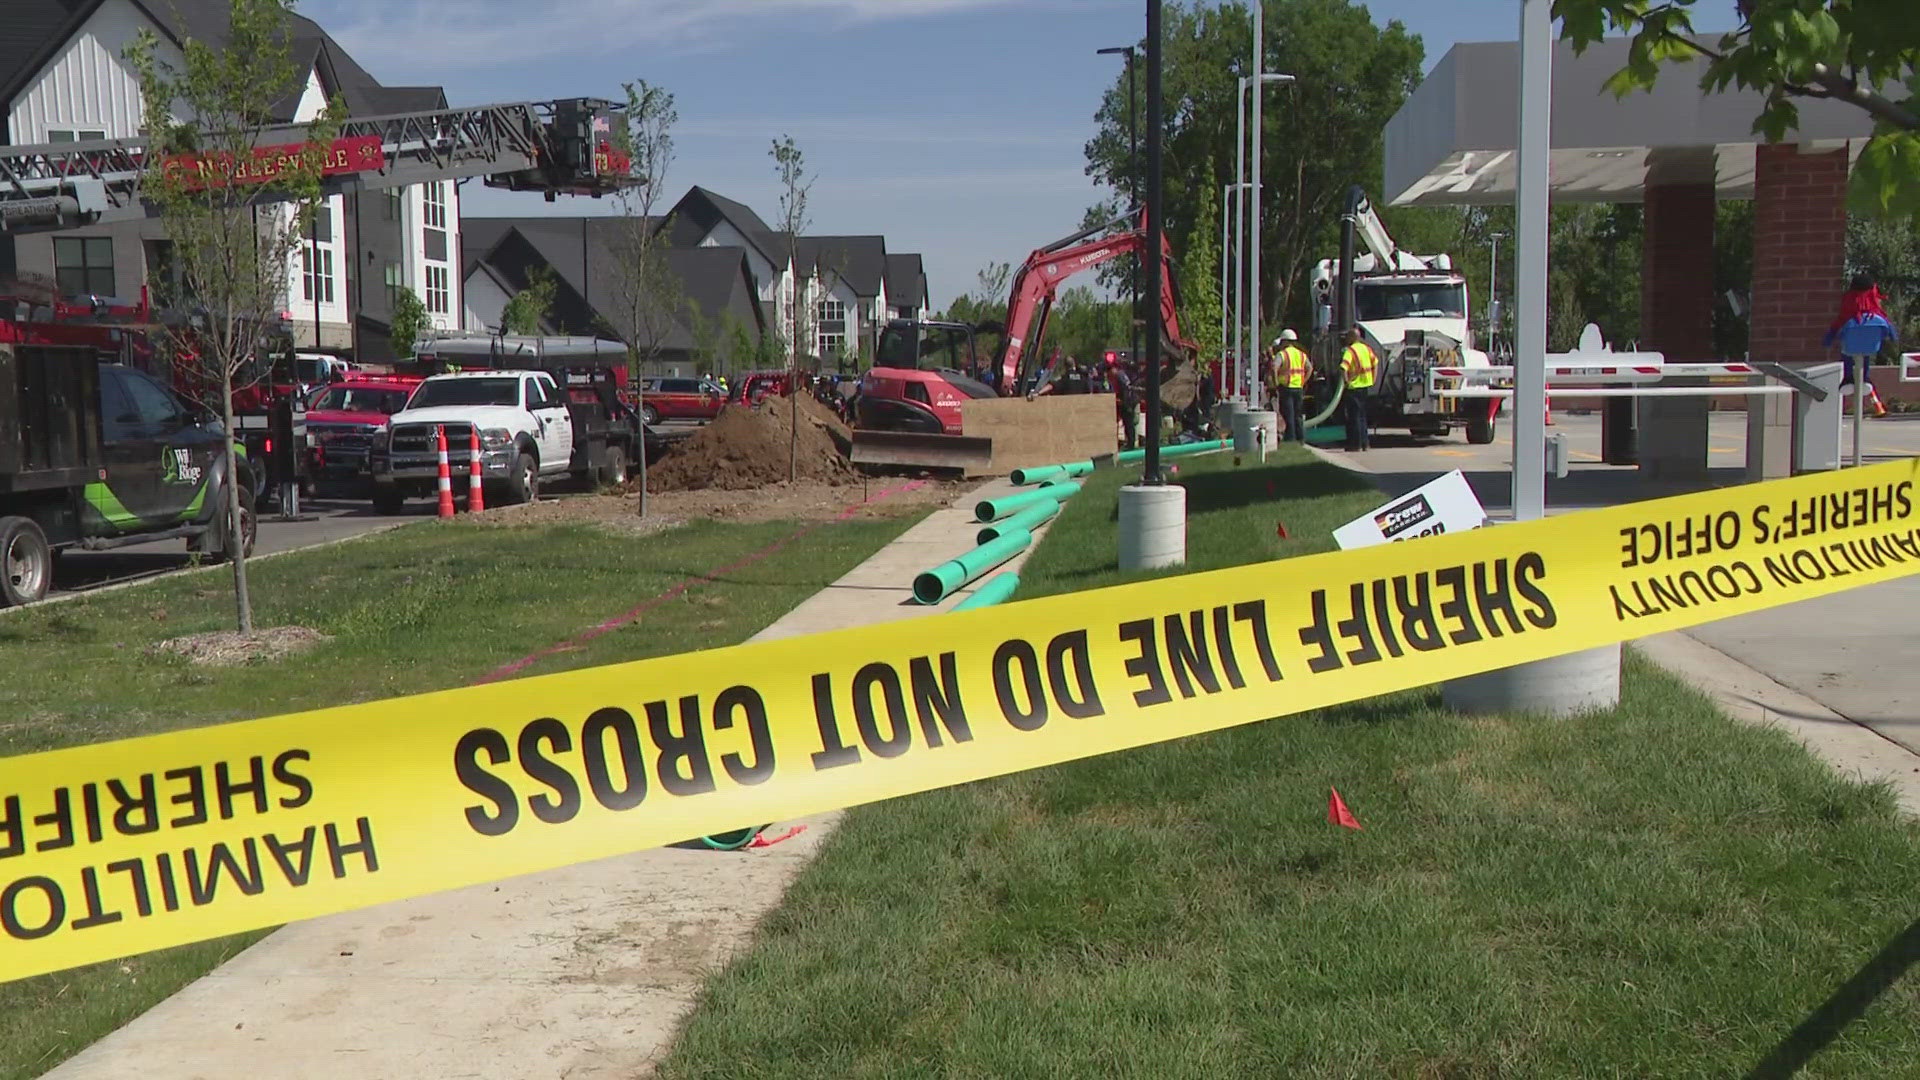 The Hamiltion County Coroner says 21-year-old Shawn Young died after getting trapped in that trench. It happened this morning near 146th street and River Road.